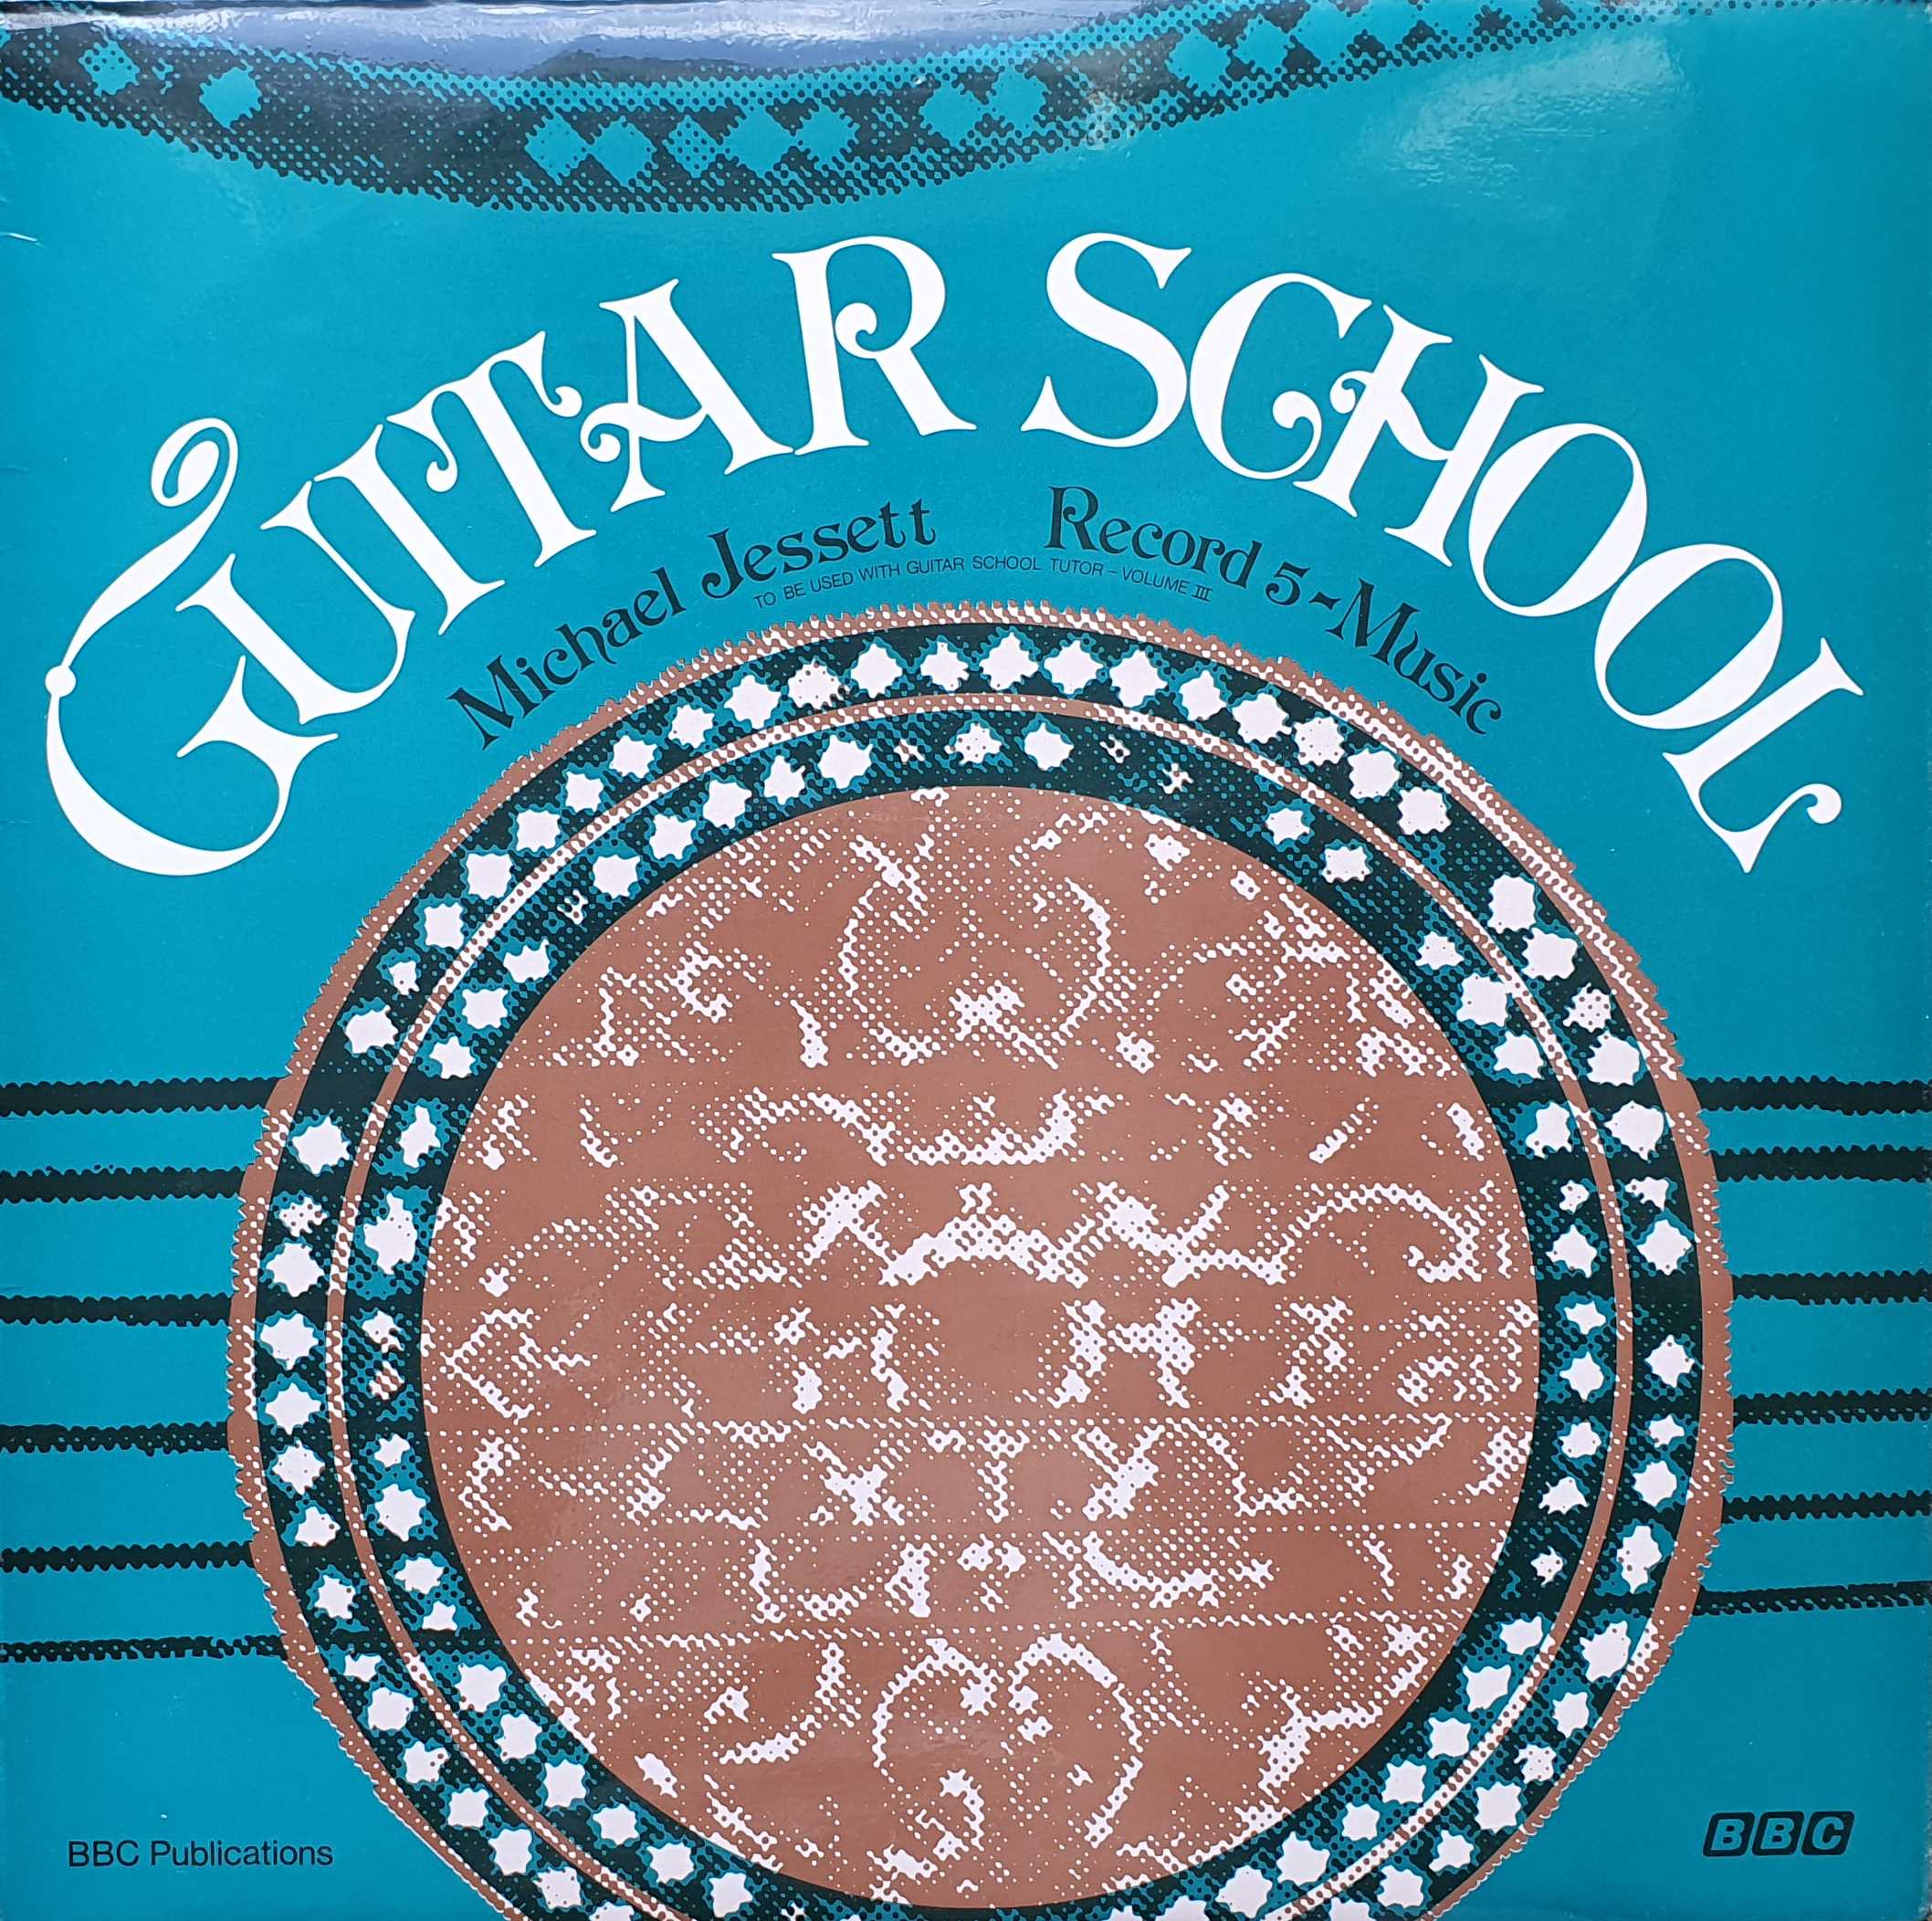 Picture of OP 209/210 Guitar school - Record 5 - Music by artist Michael Jessett from the BBC albums - Records and Tapes library